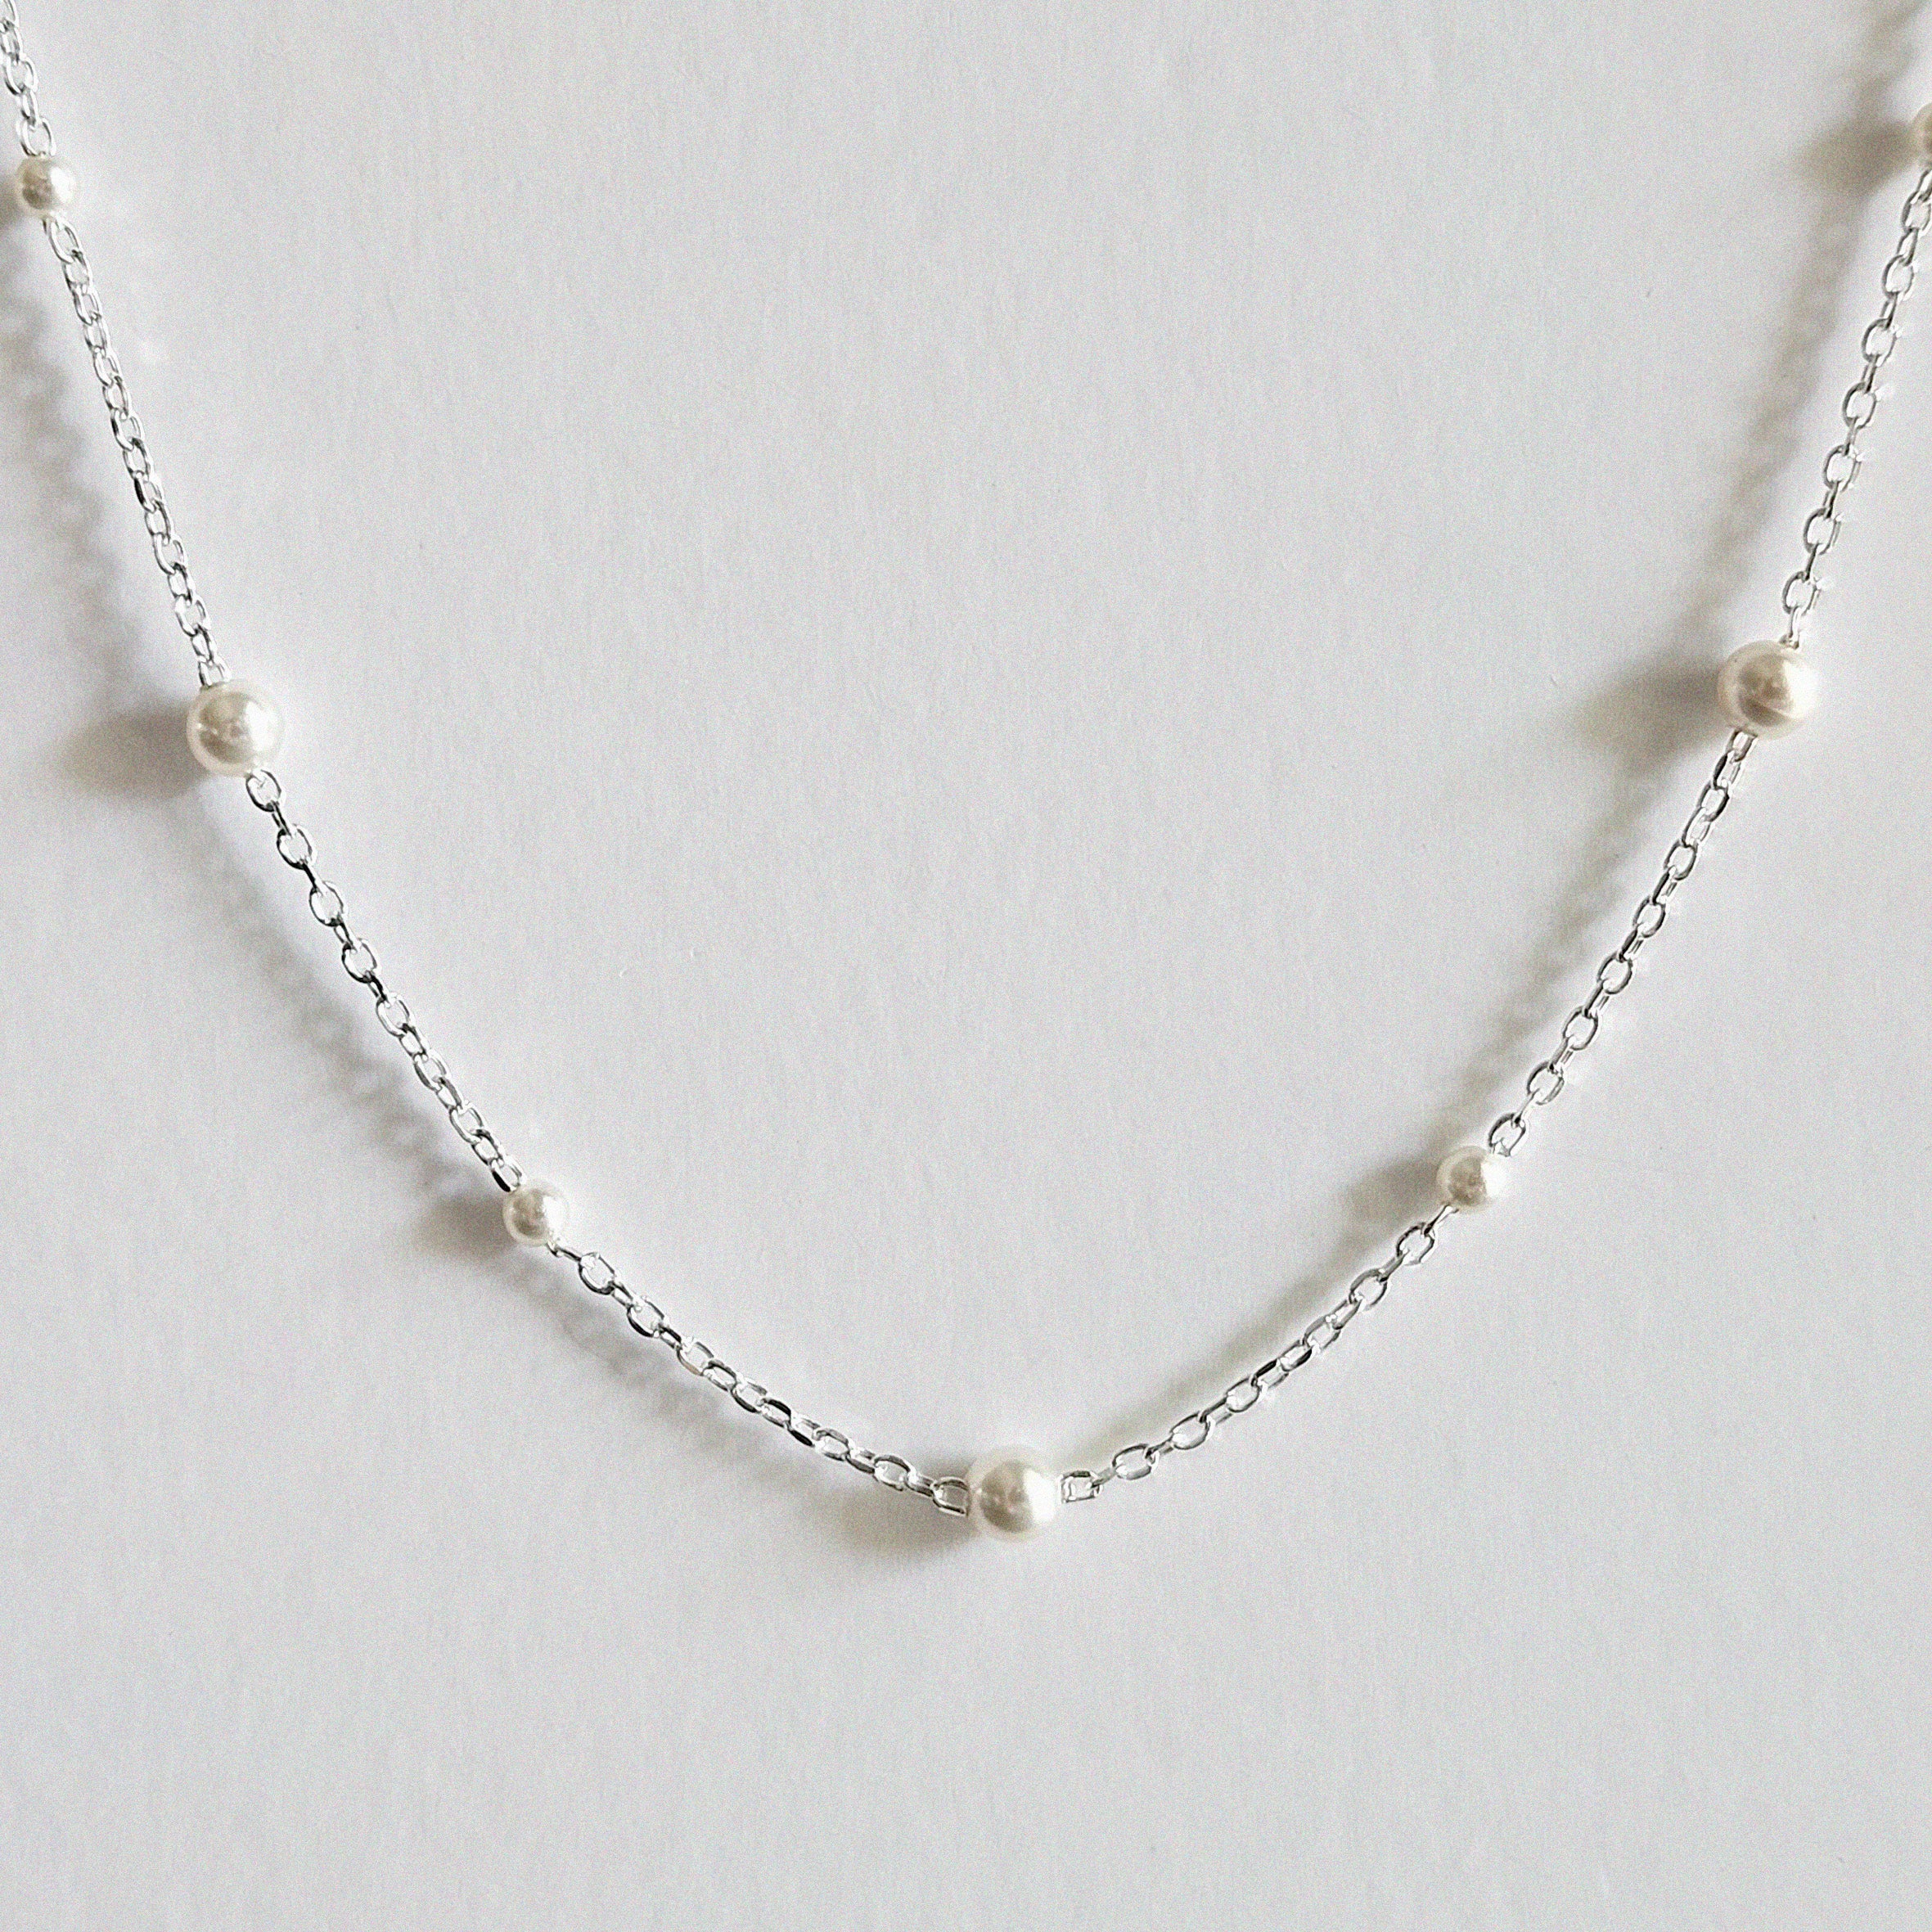 Mixed Pearls Necklace